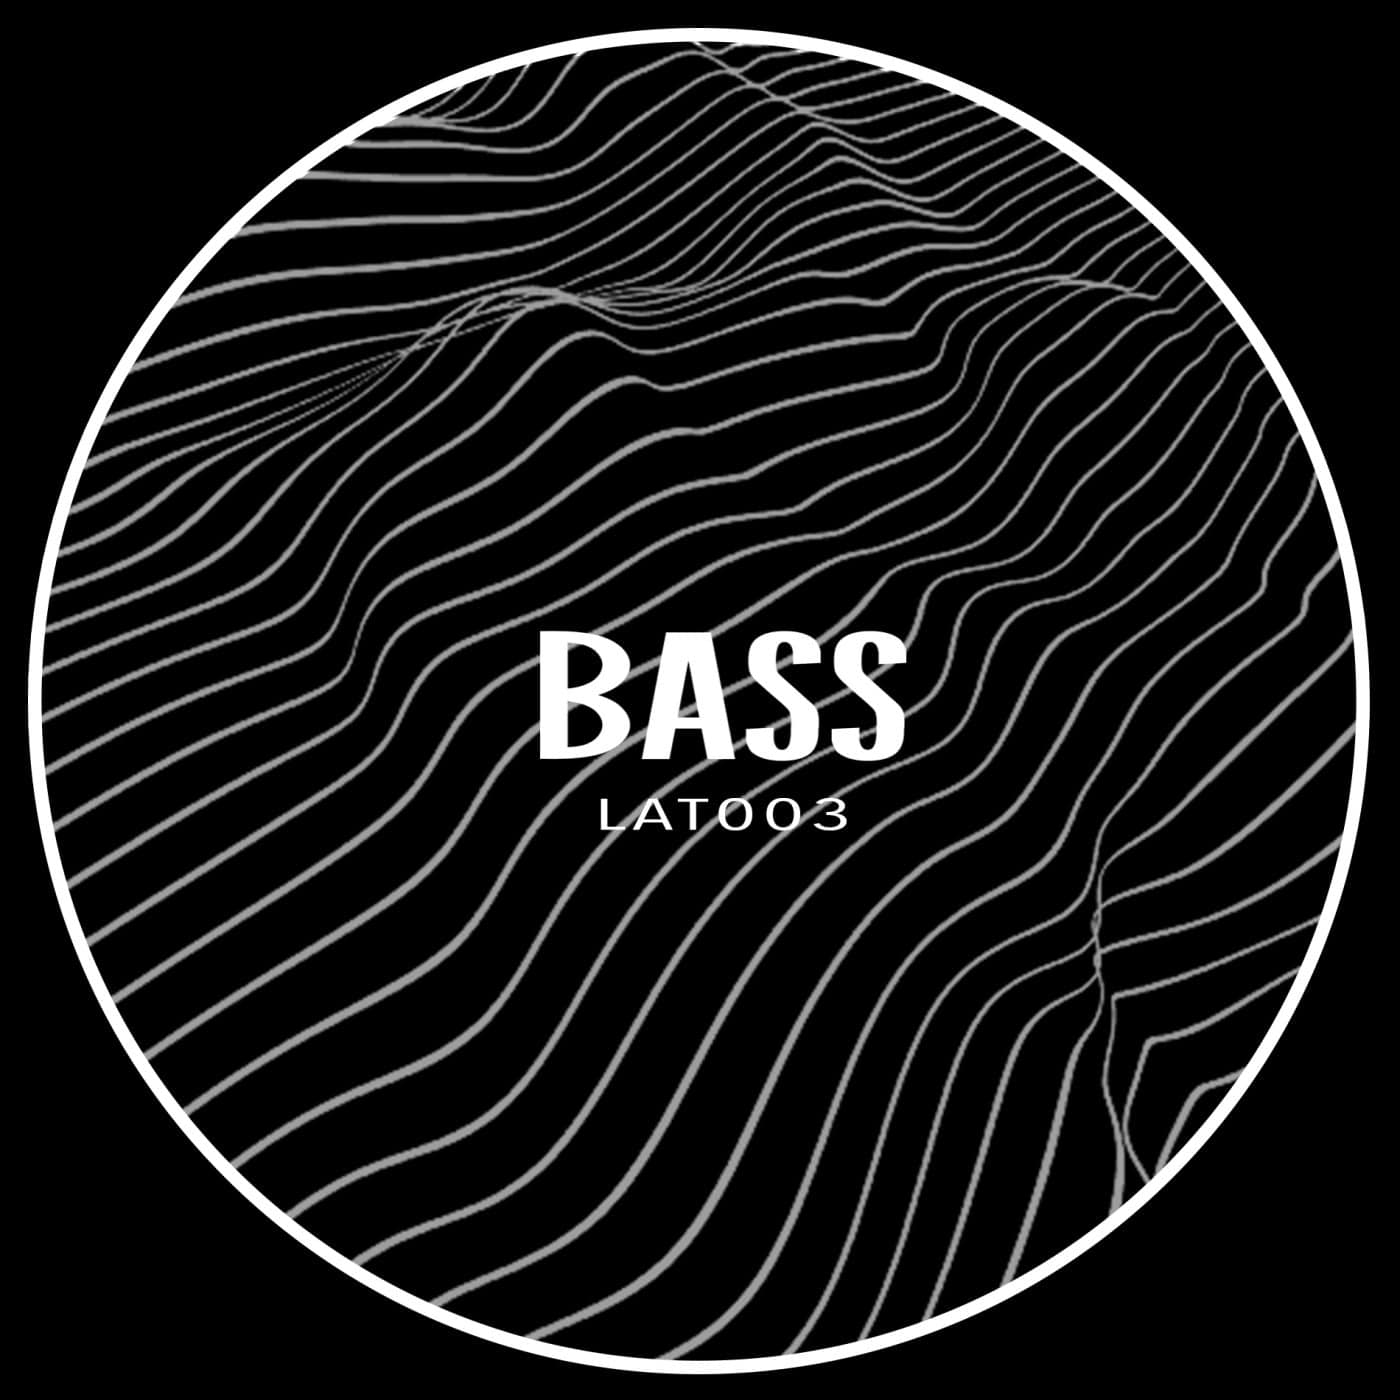 image cover: Bass by Latmun on Lateral